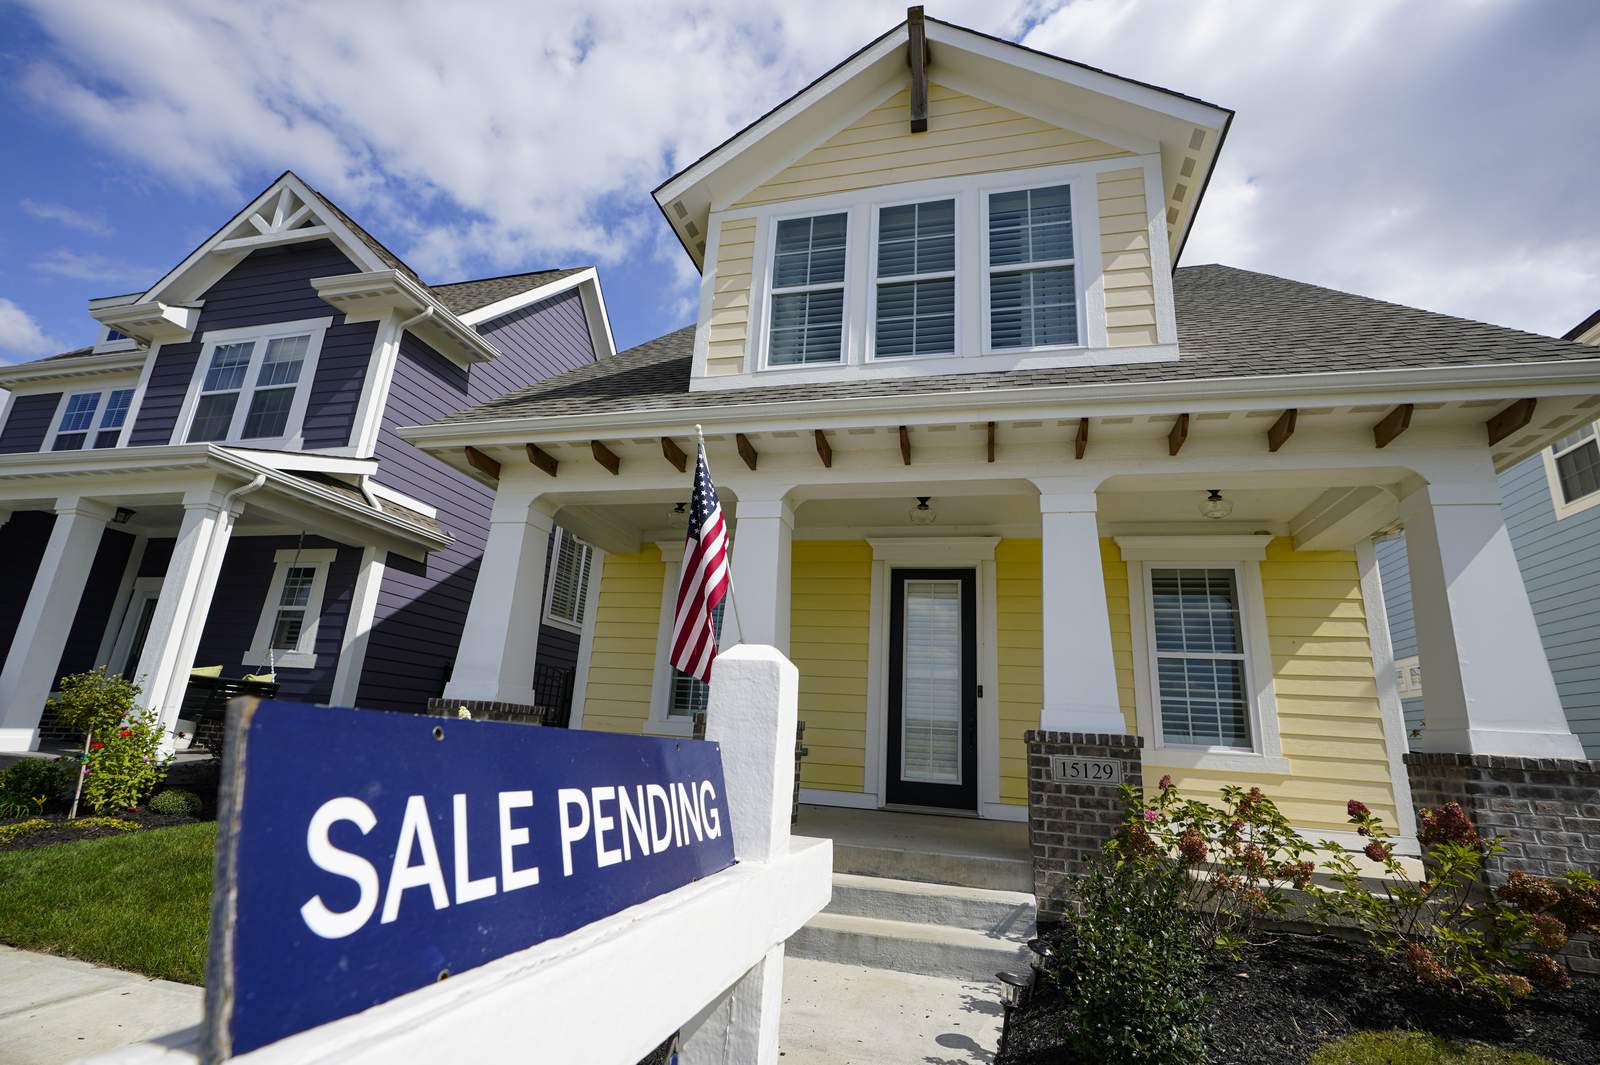 September existing home sales climb 9.4%, highest since '06